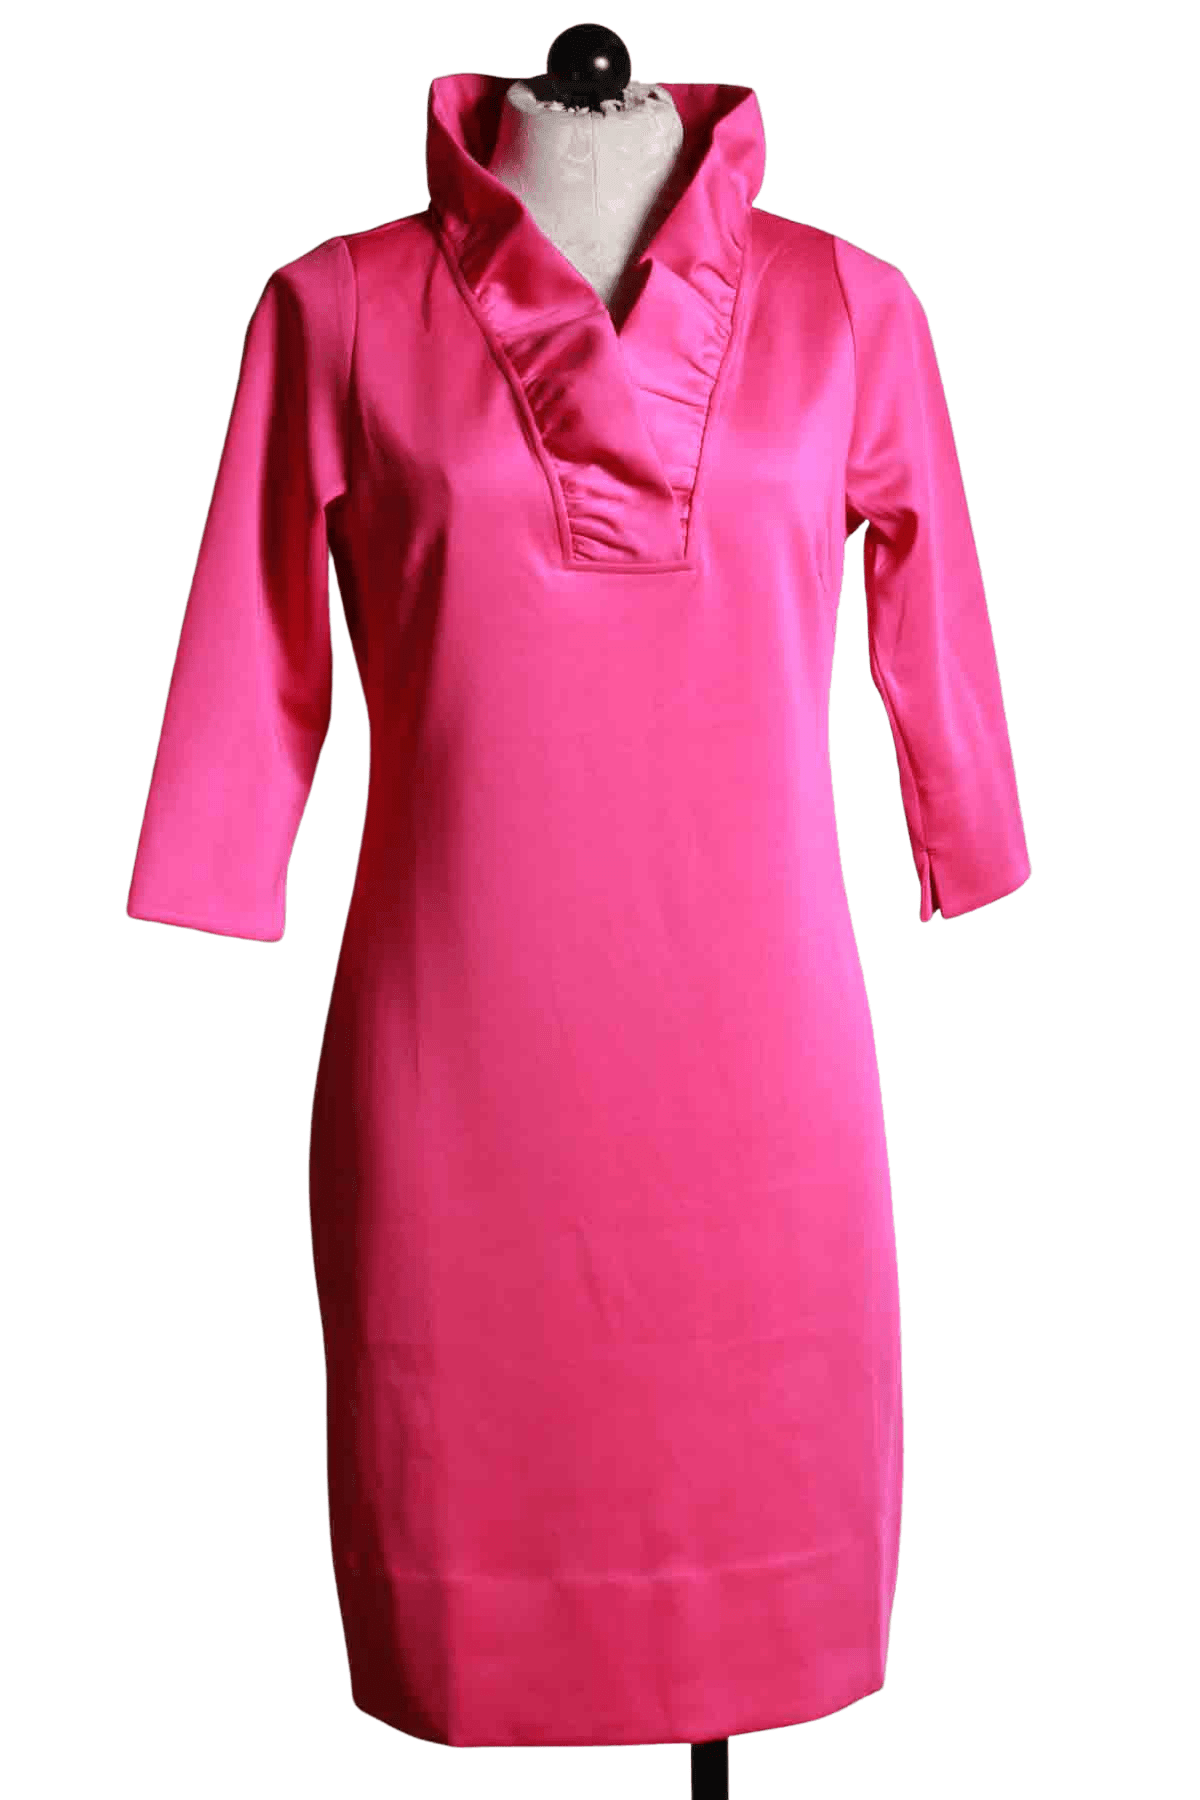 3/4 sleeve solid Fuschia dress has a stand up 2 1/2" ruffled V Neck collar